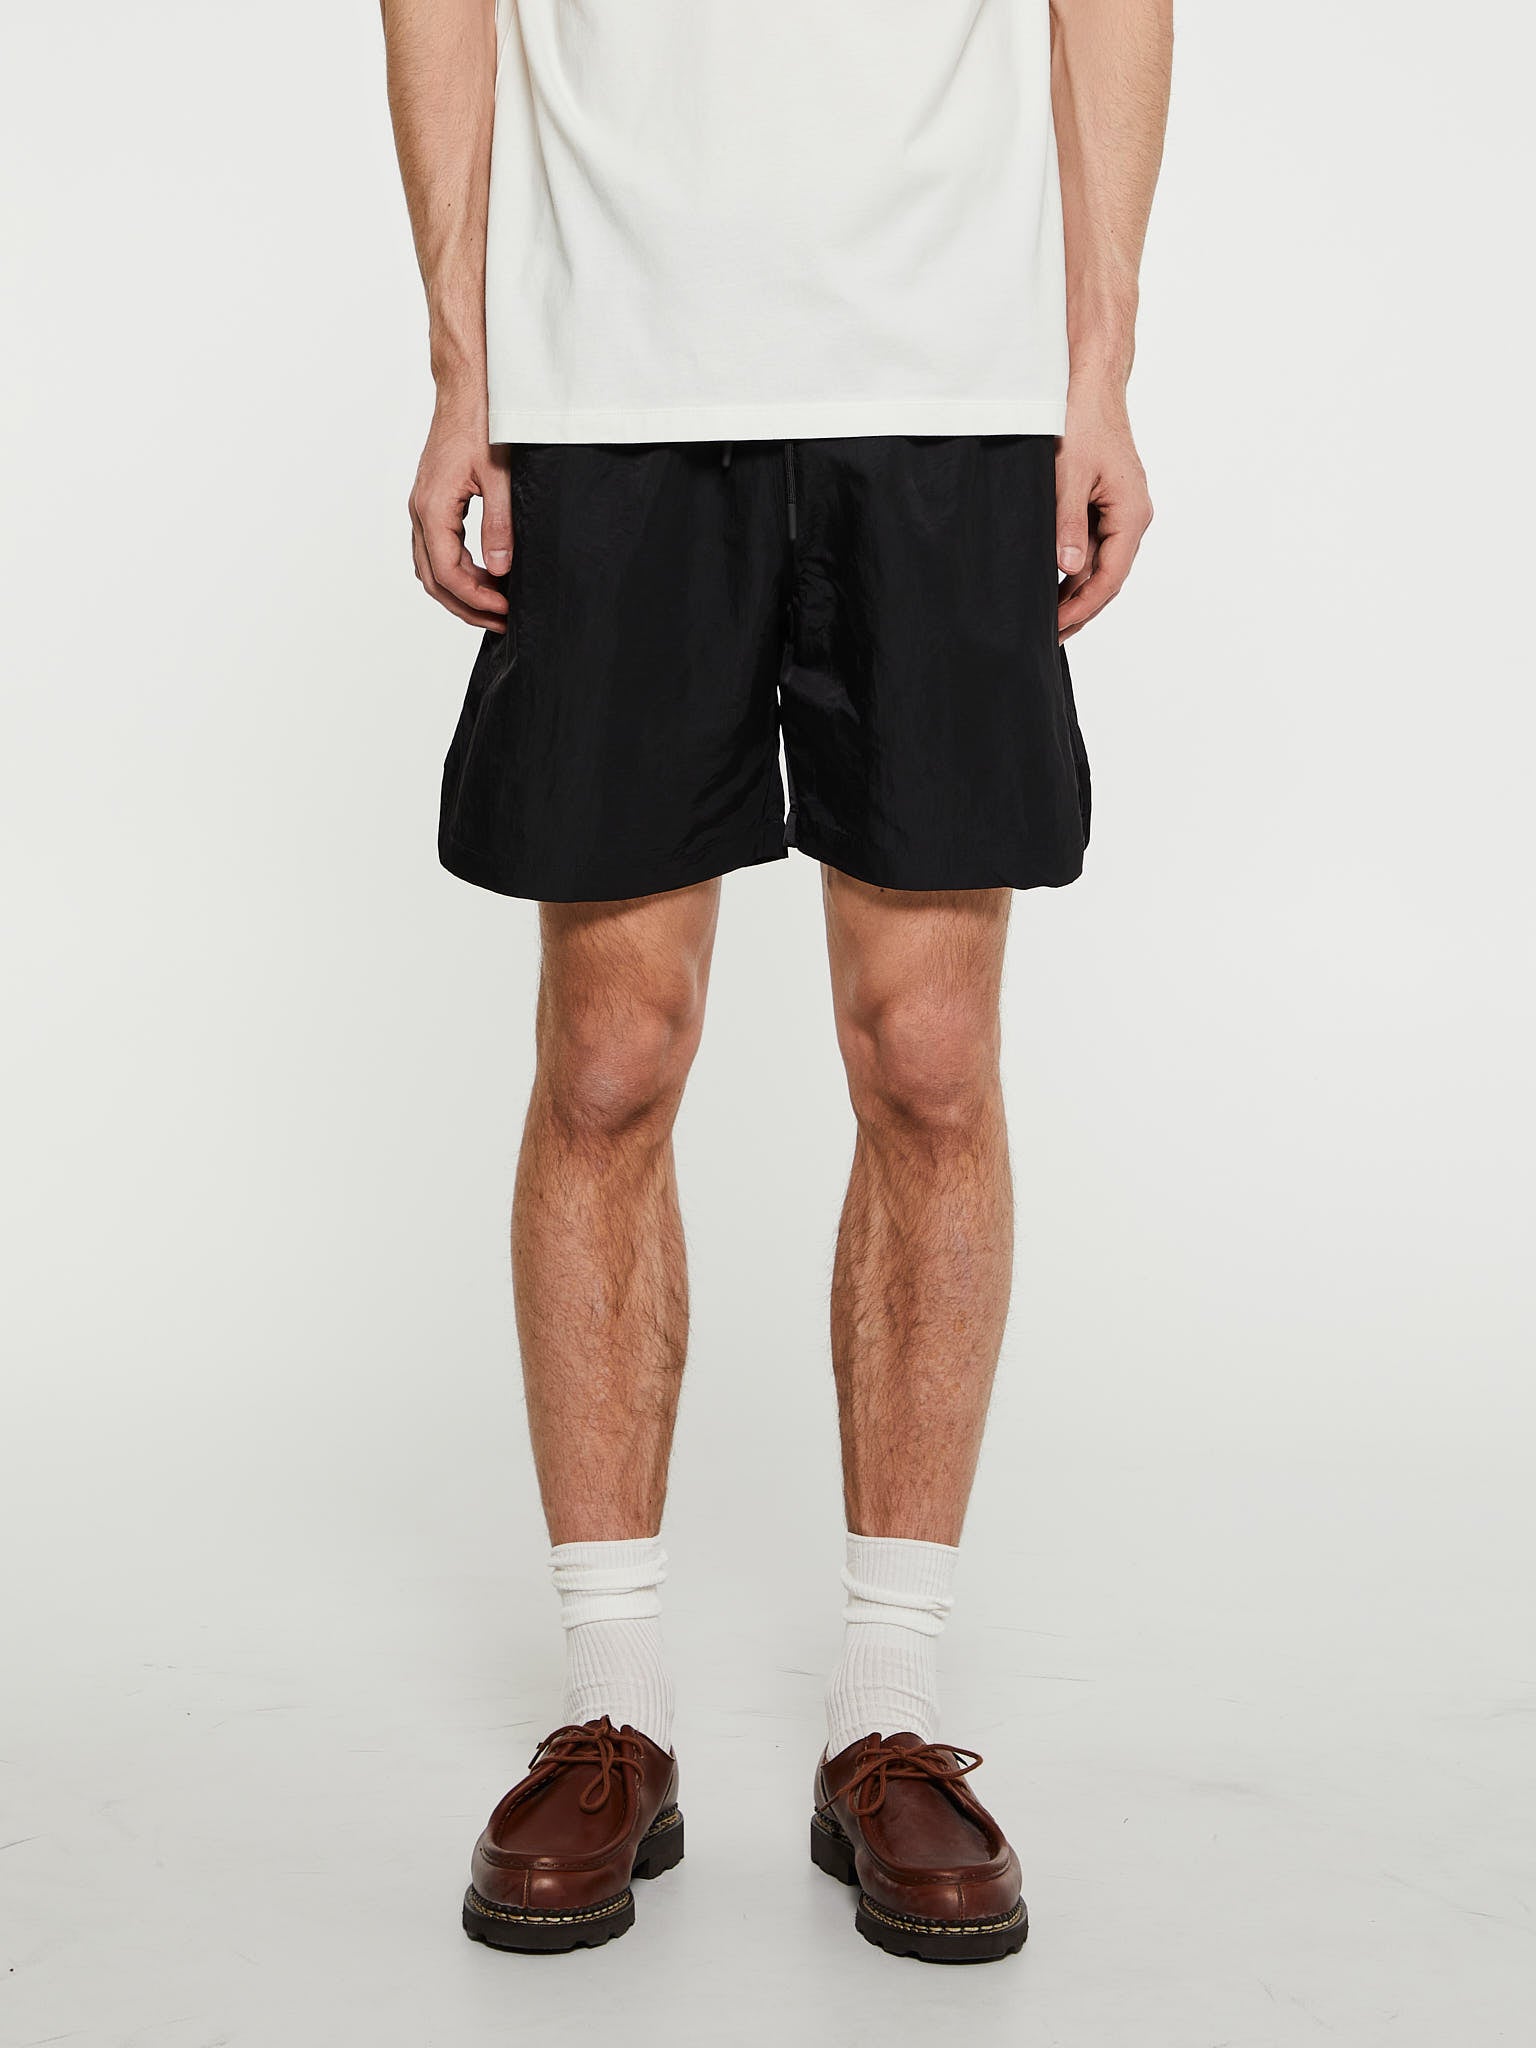 Sunflower - Mike Shorts in Black